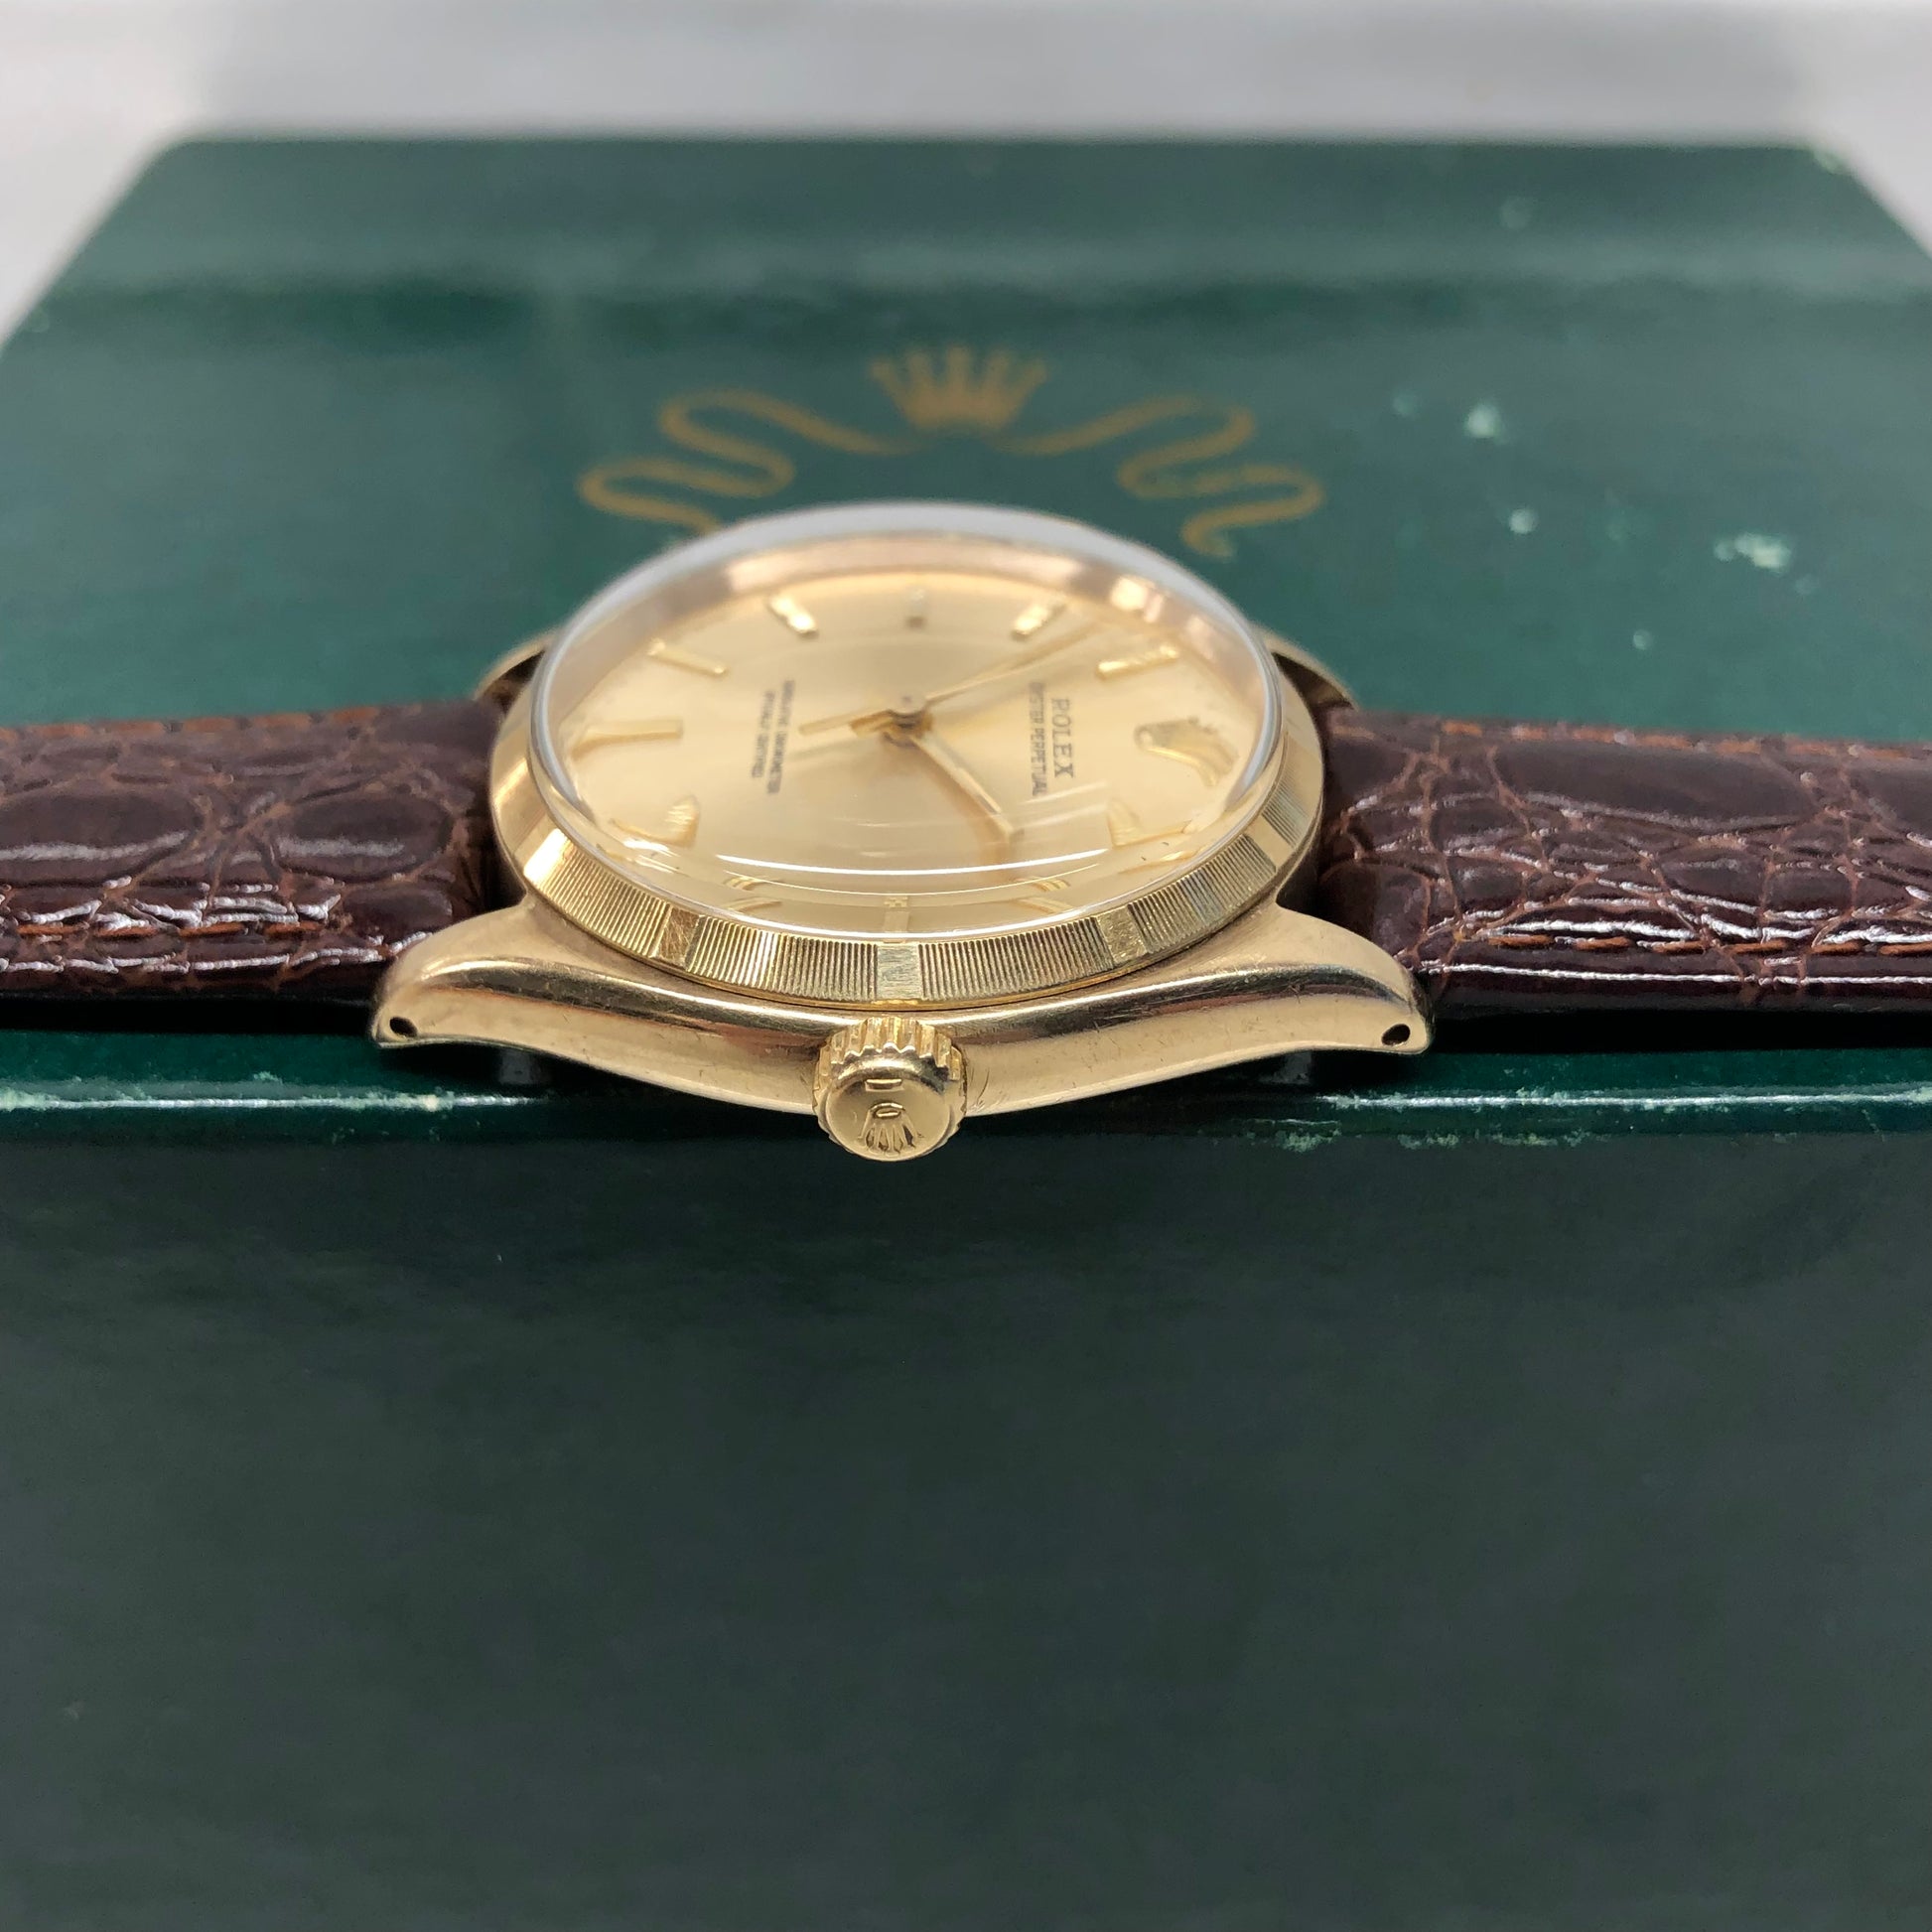 1961 Rolex Oyster Perpetual 1003 9k Yellow Gold English Chronometer Engine Turned Wristwatch - HASHTAGWATCHCO